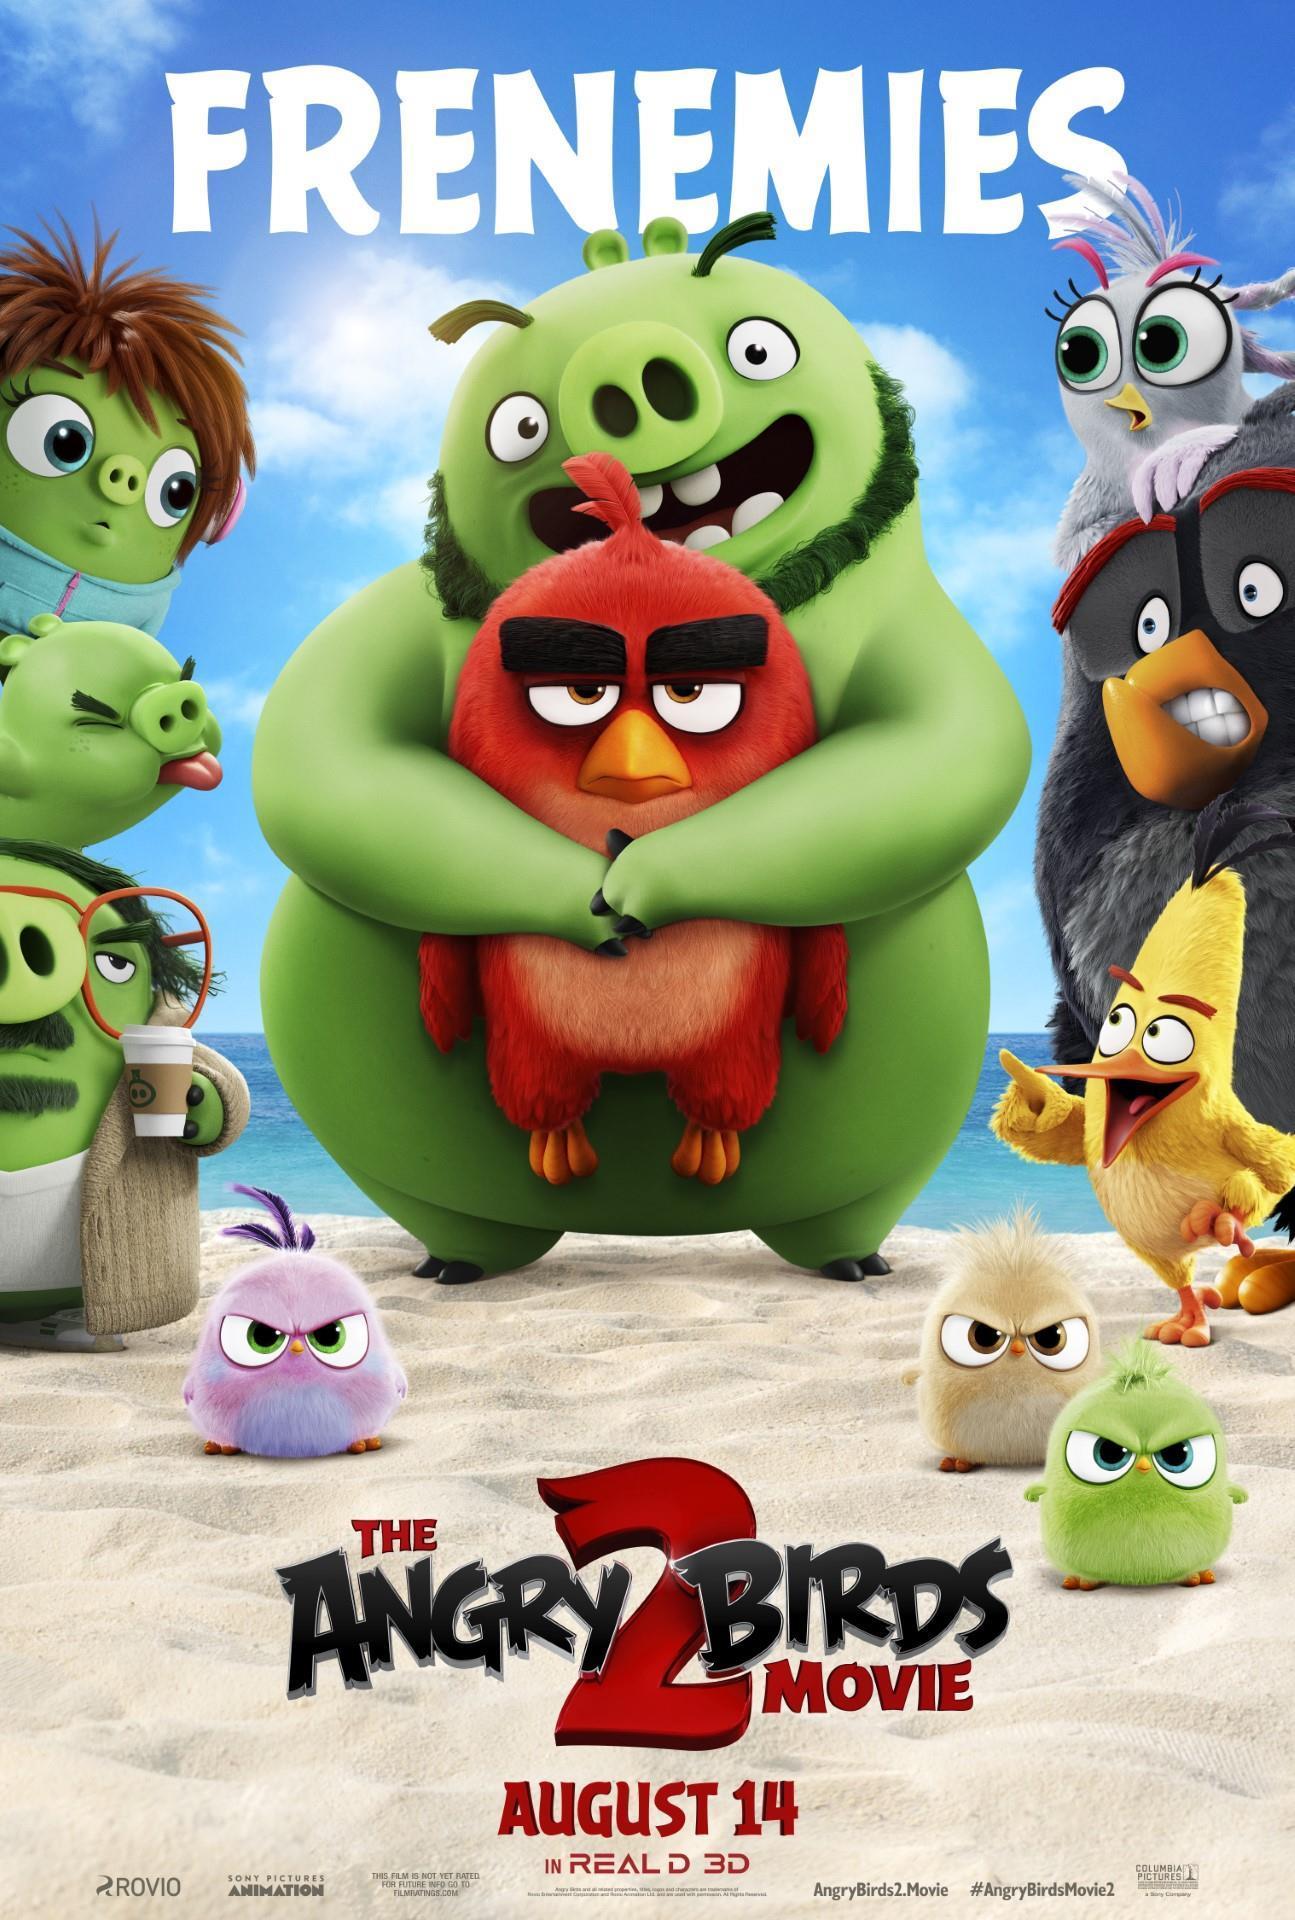 courtney angry birds 2